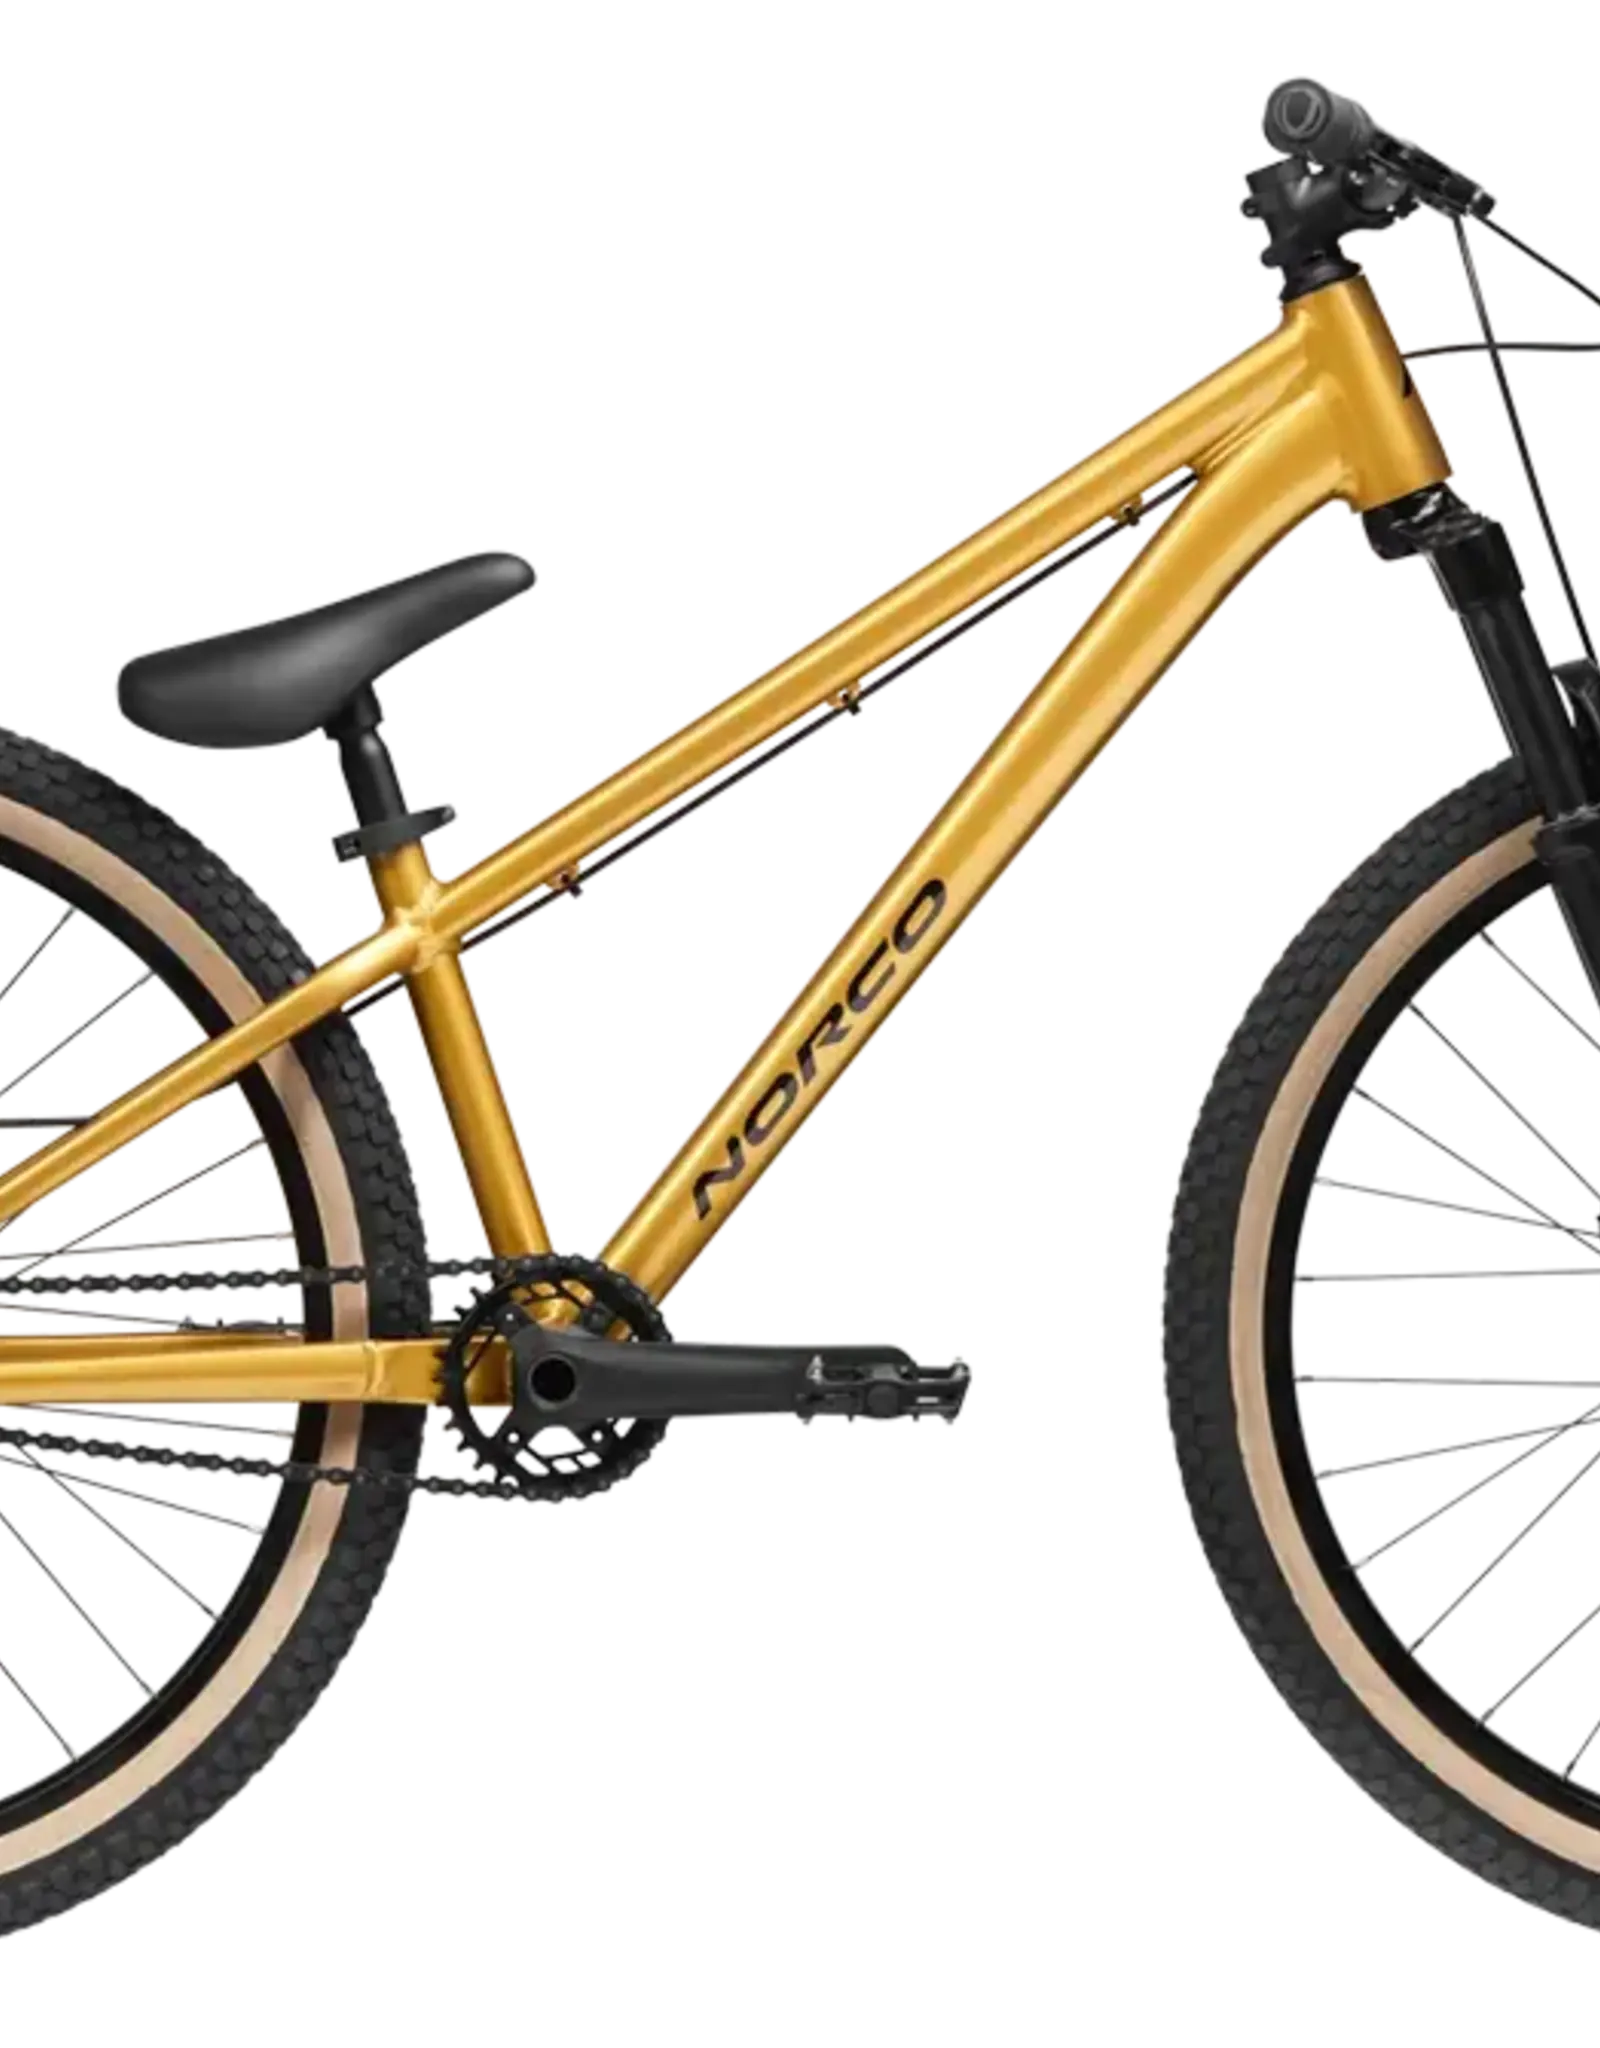 NORCO Norco RAMPAGE 2  Small 26- Gold/Black